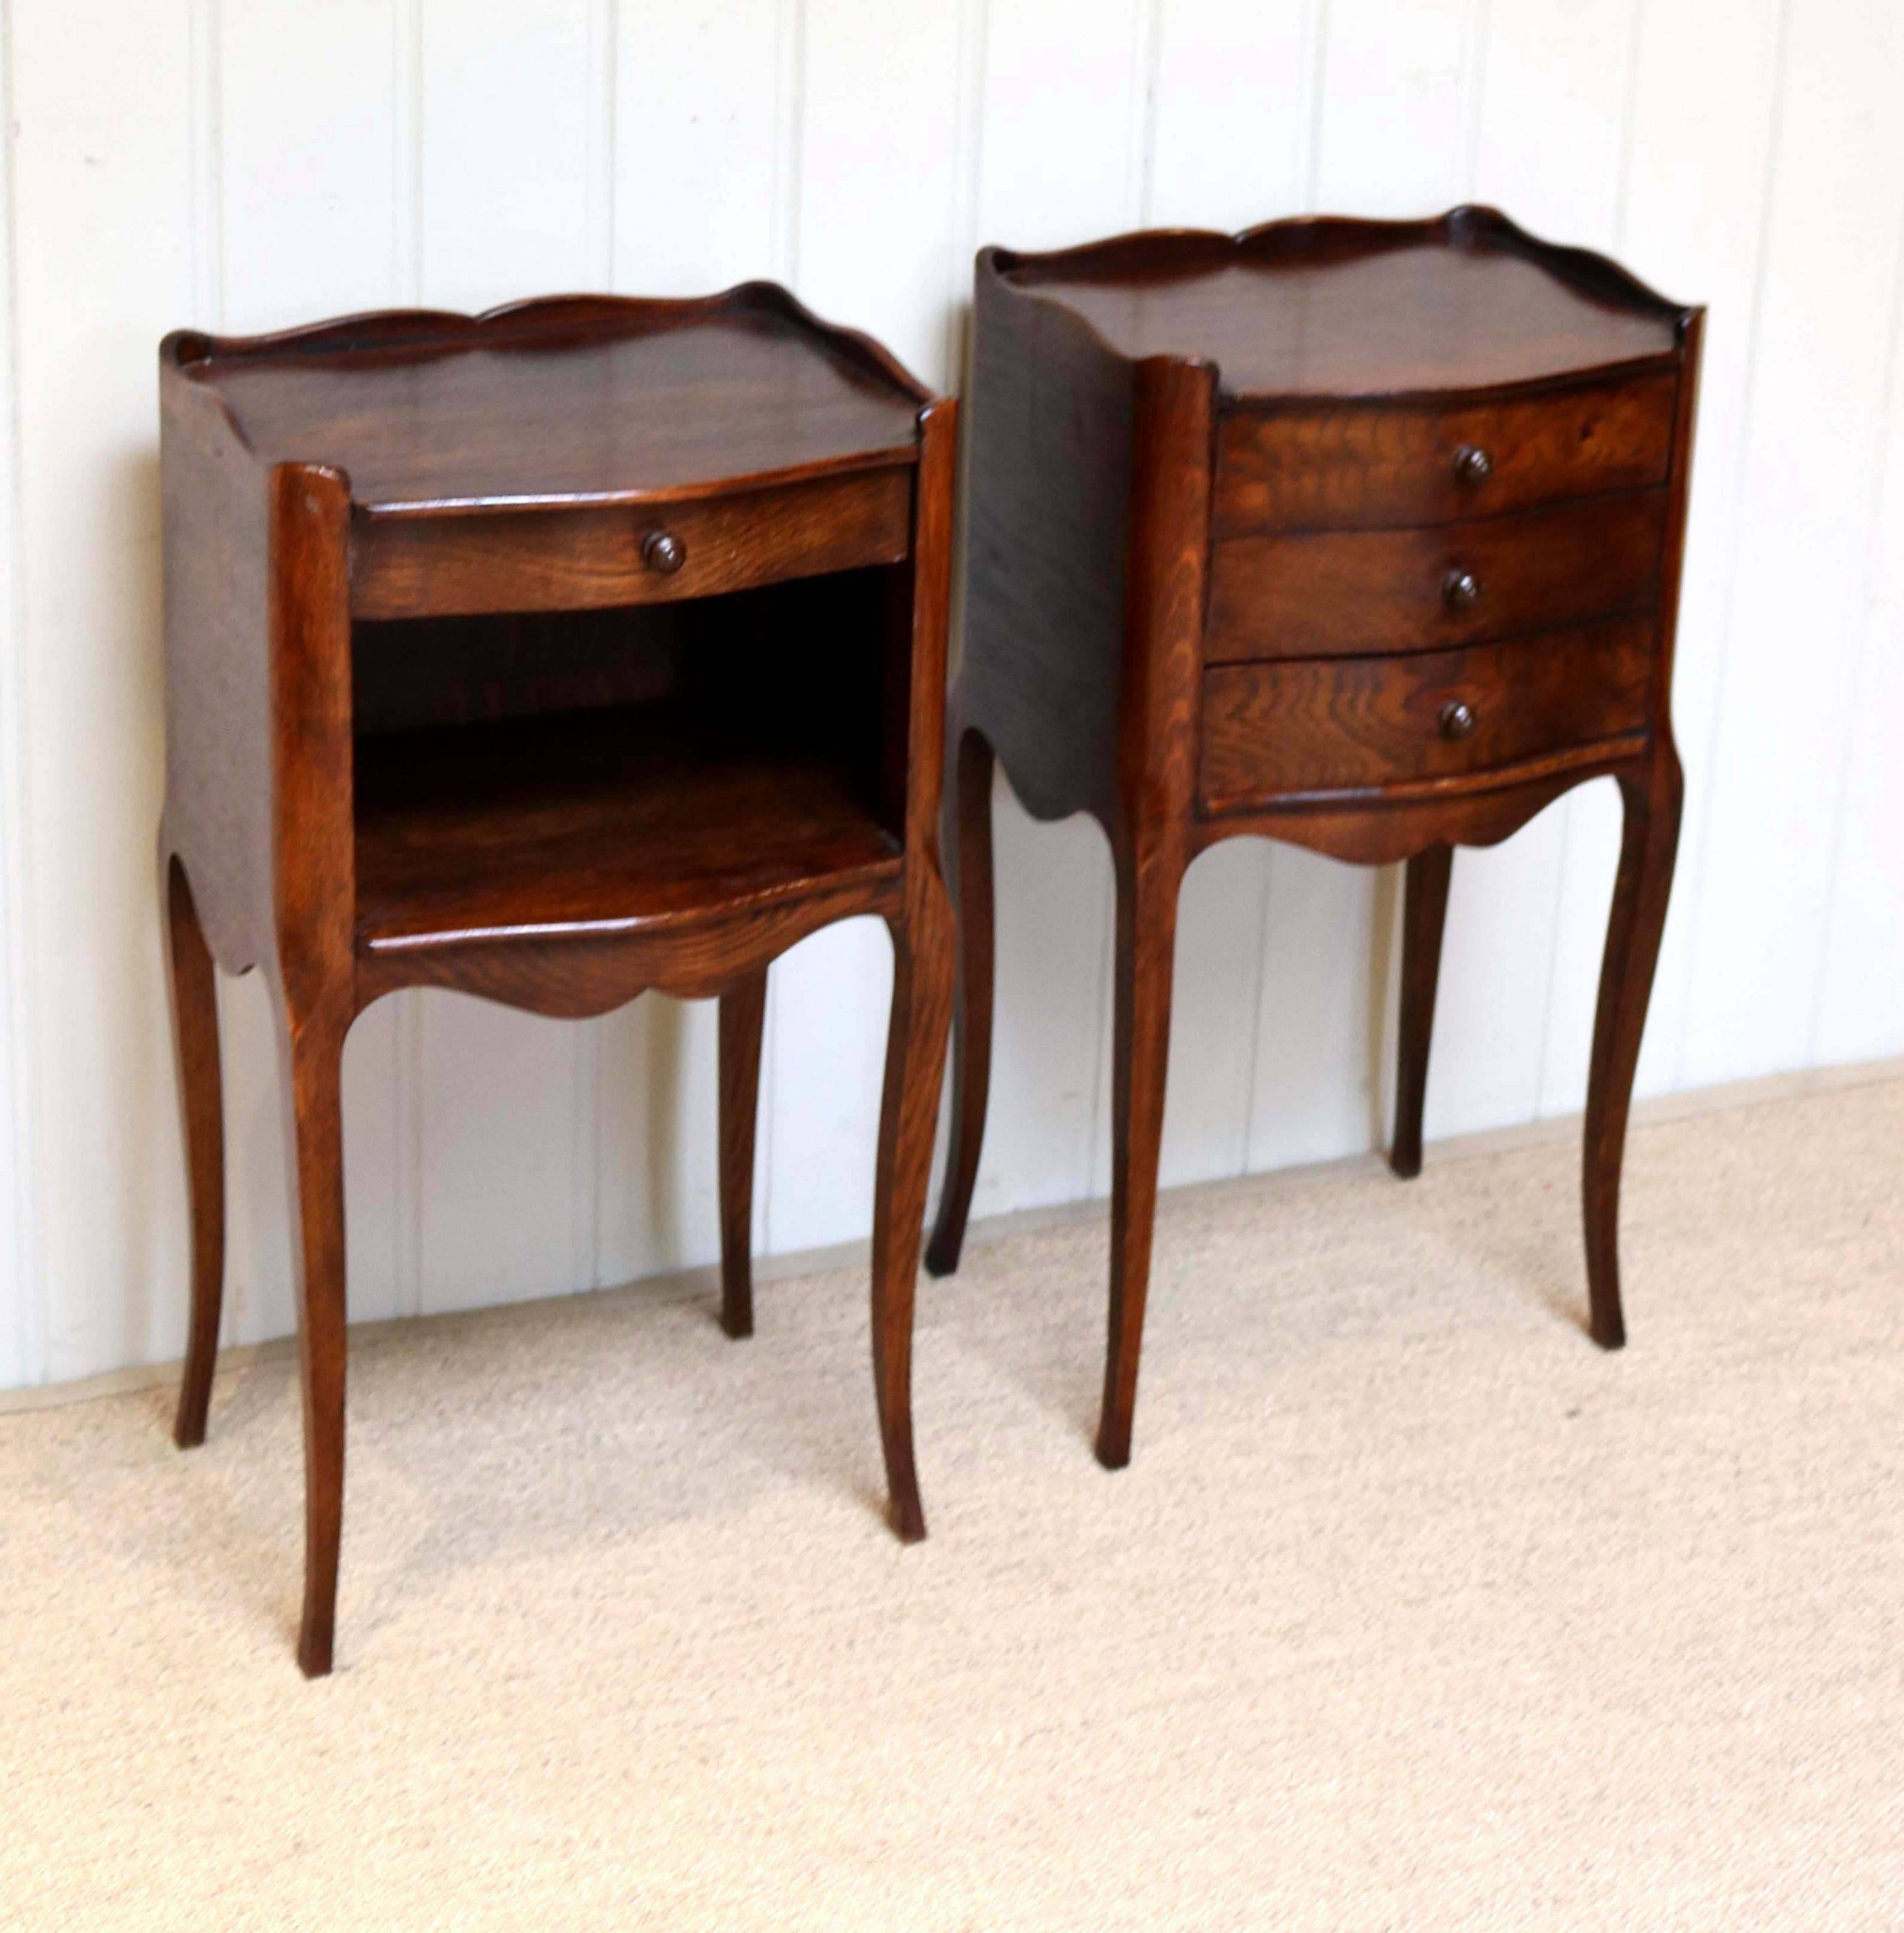 Pair of French oak bedside cabinets one having three drawers the other with a single drawer above an open cupboard base raised on cabriole legs.